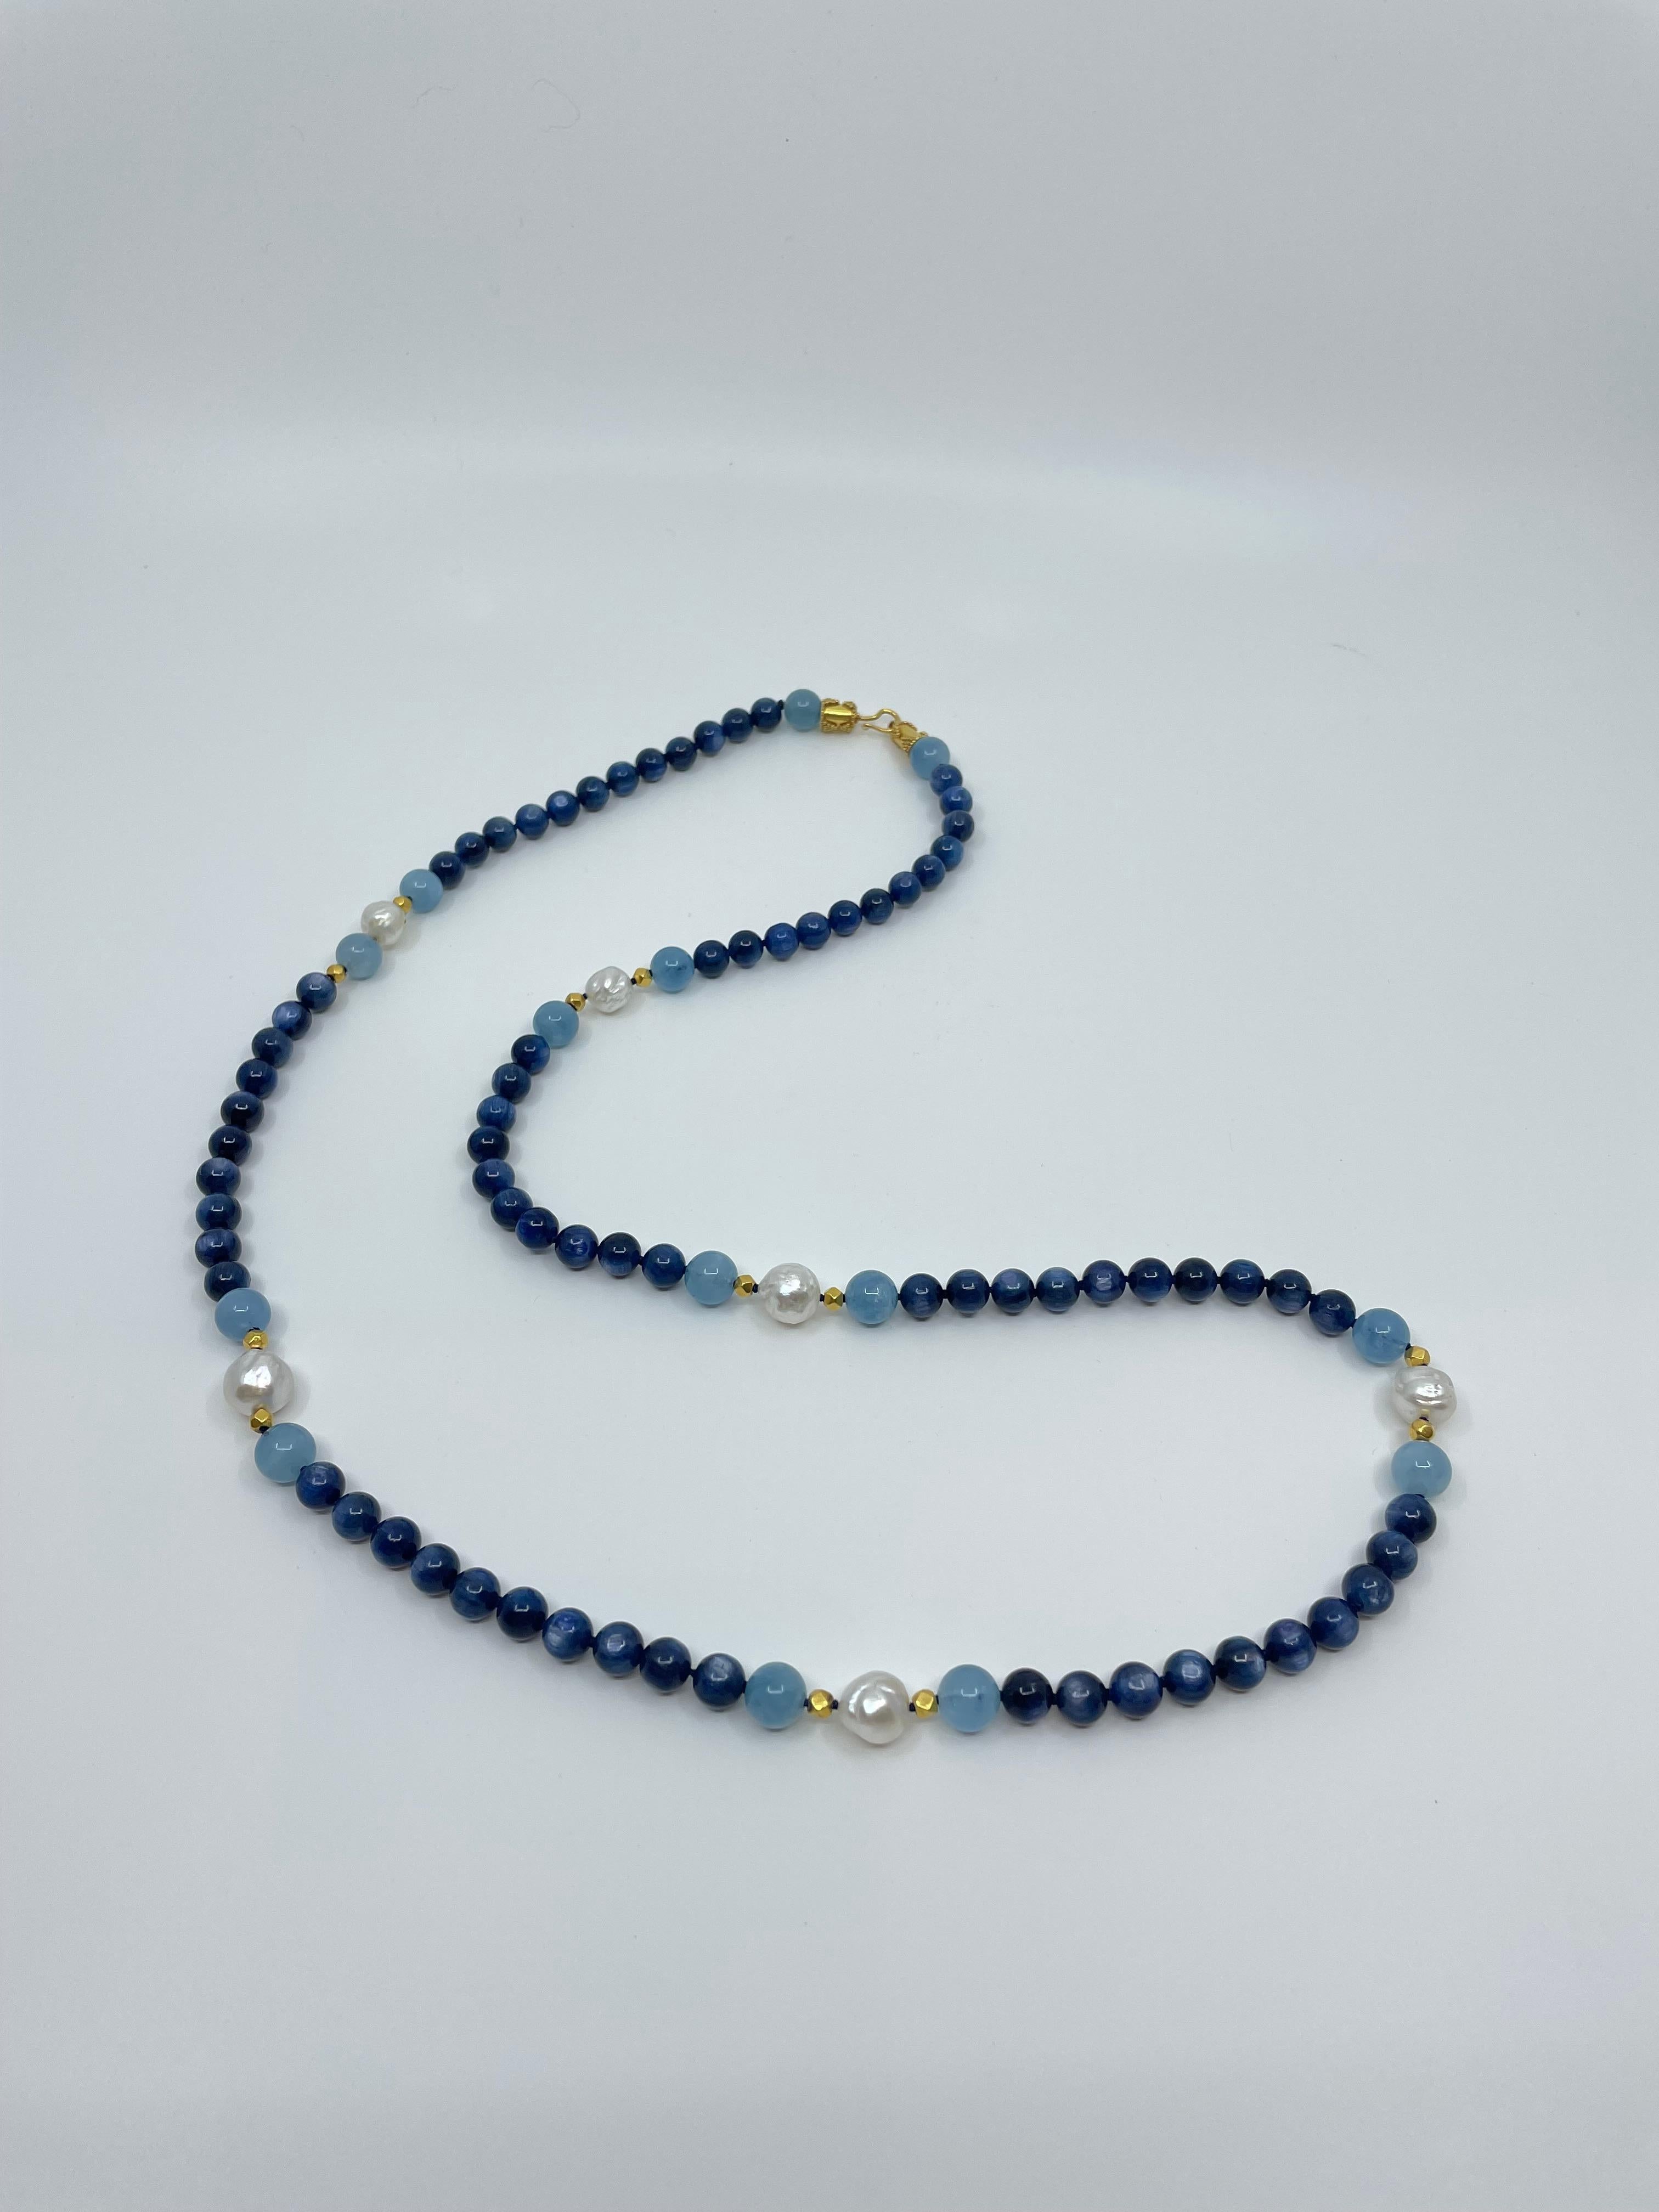 Long Necklace with Kyanite, Aquamarine, South Sea Pearls & 18K Solid Gold Beads For Sale 7